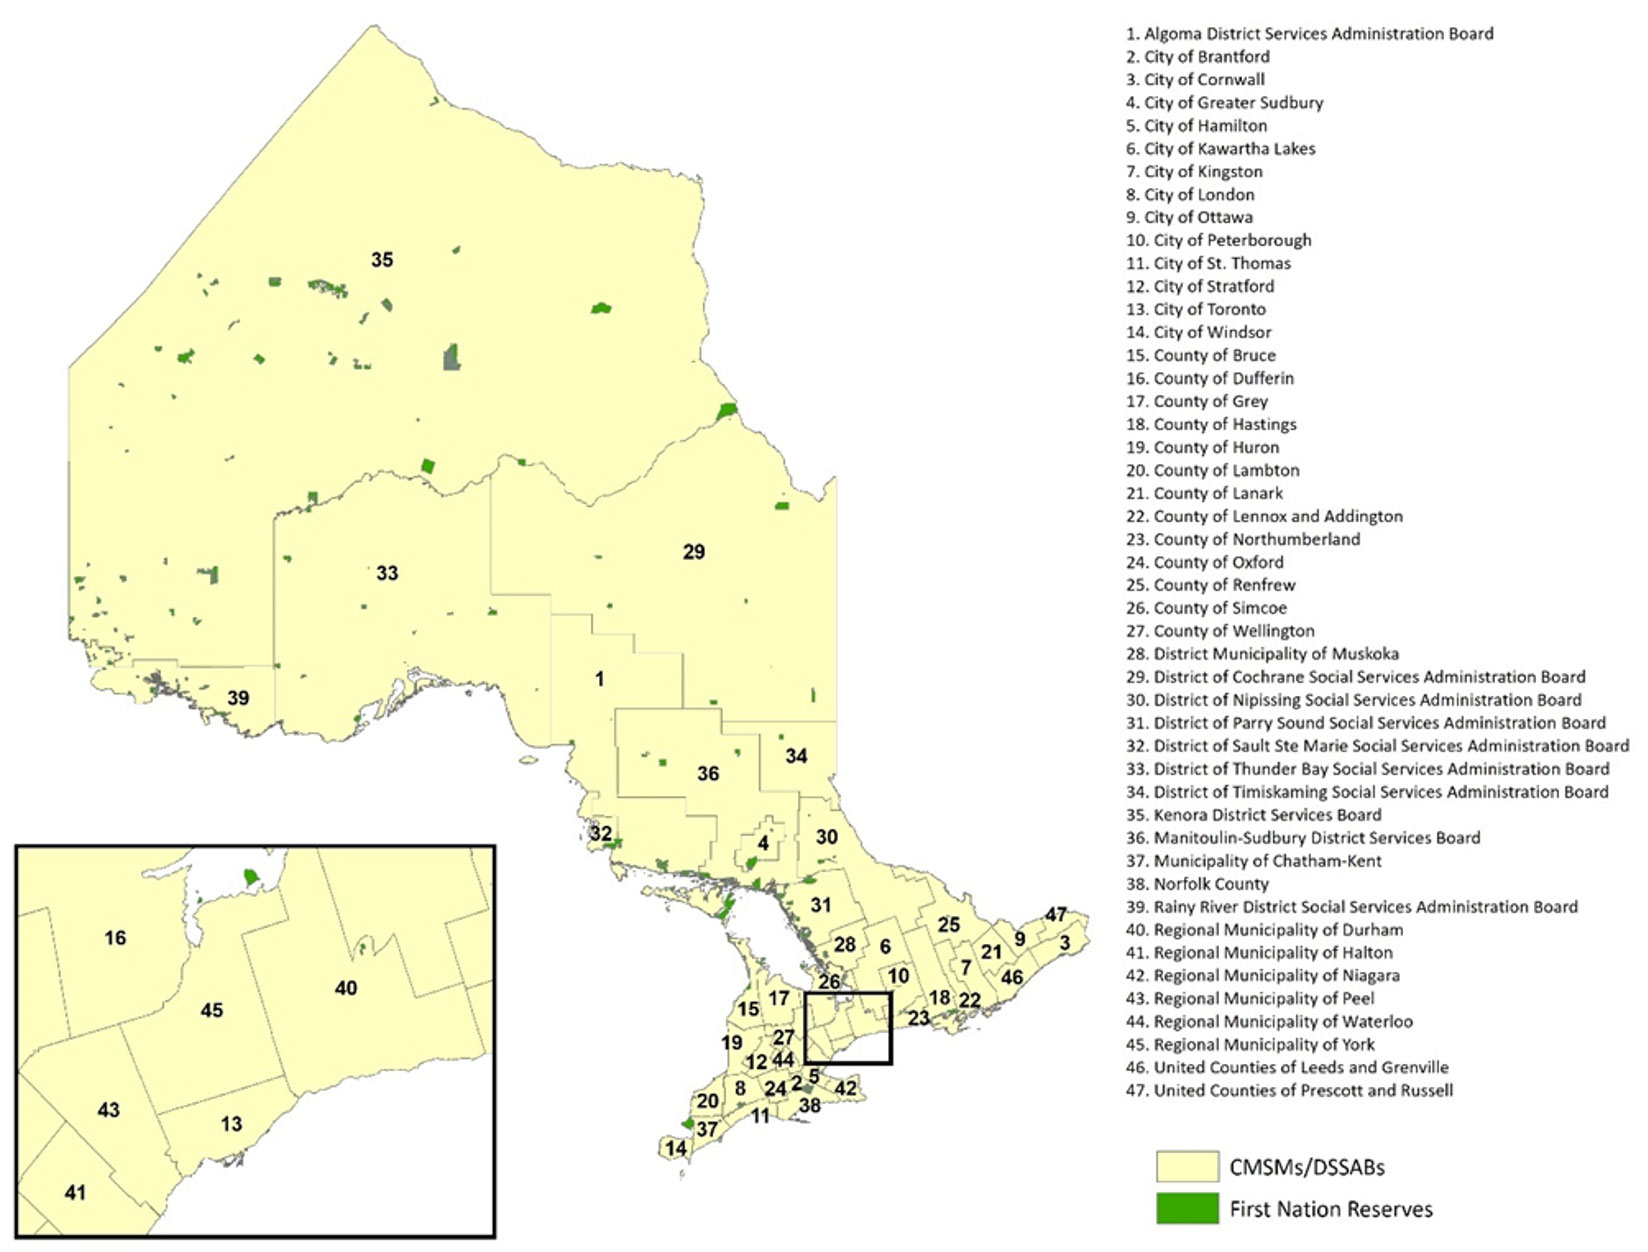 Map of Ontario showing the locations of Consolidated Municipal Service Managers and District Social Services Administration Boards, which are as follows: